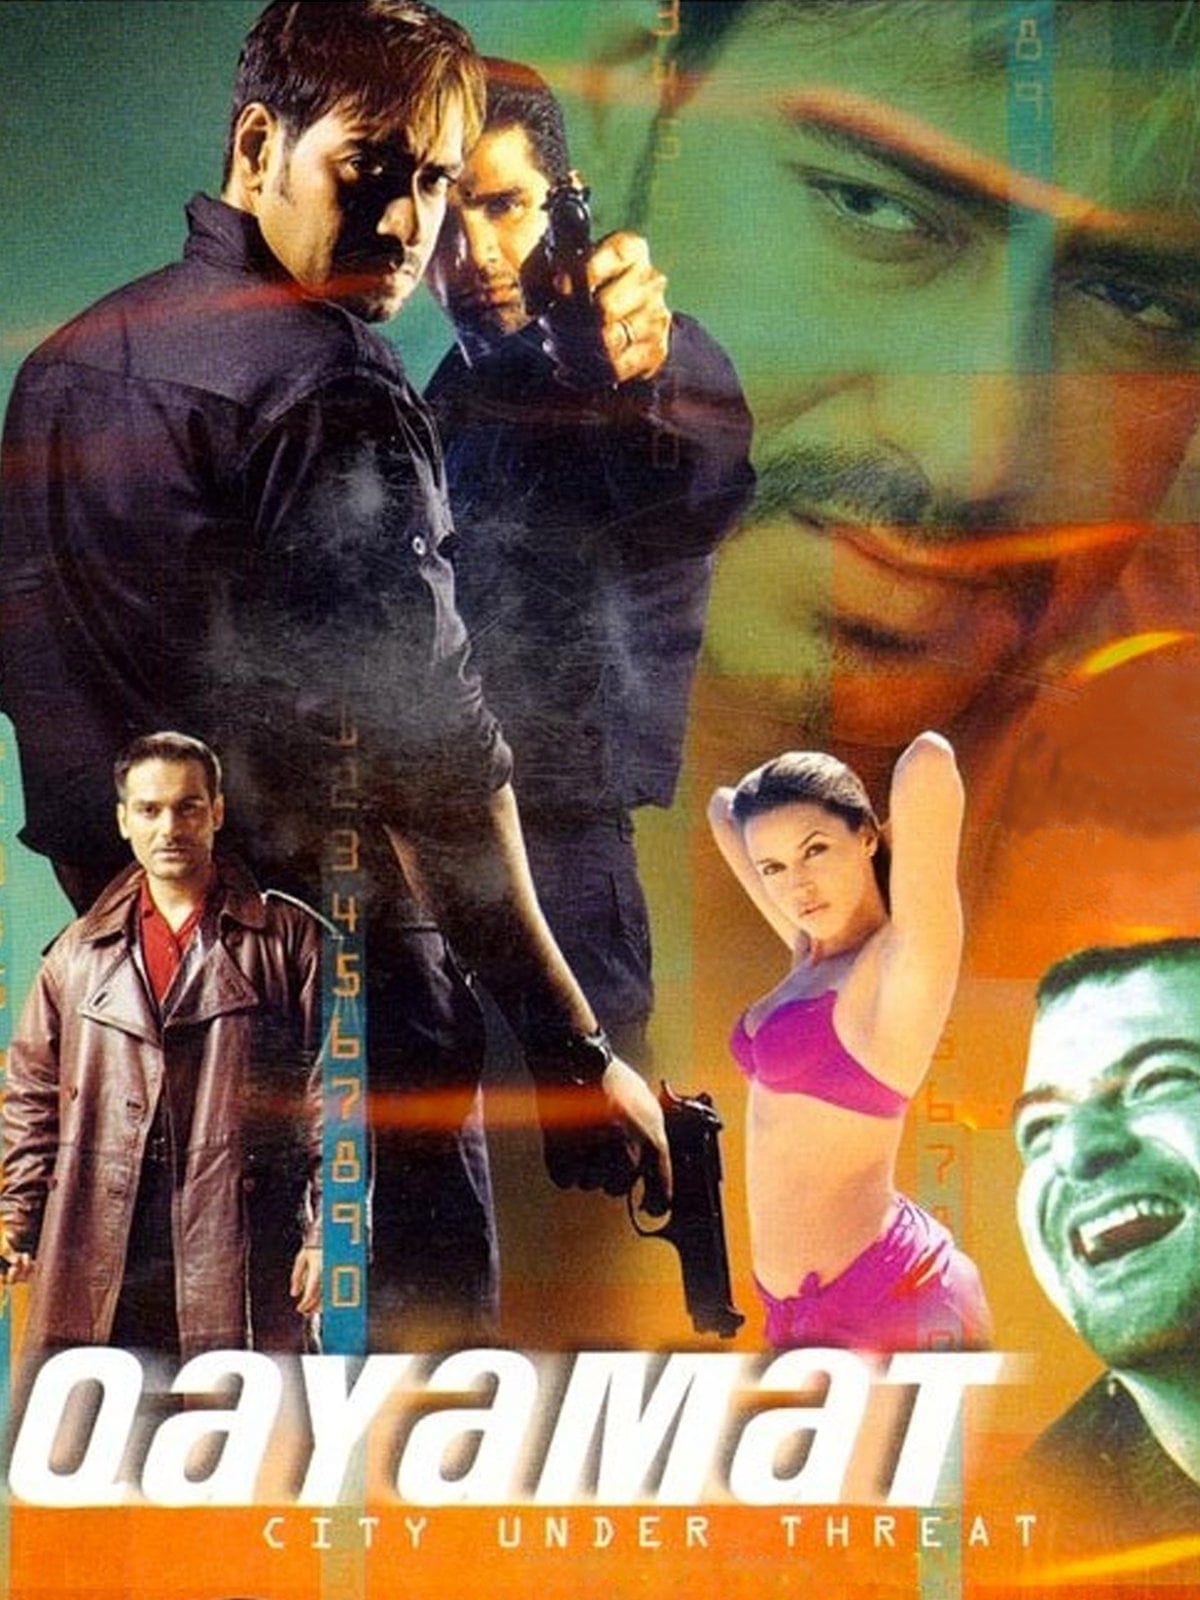 Poster for the movie "Qayamat: City Under Threat"